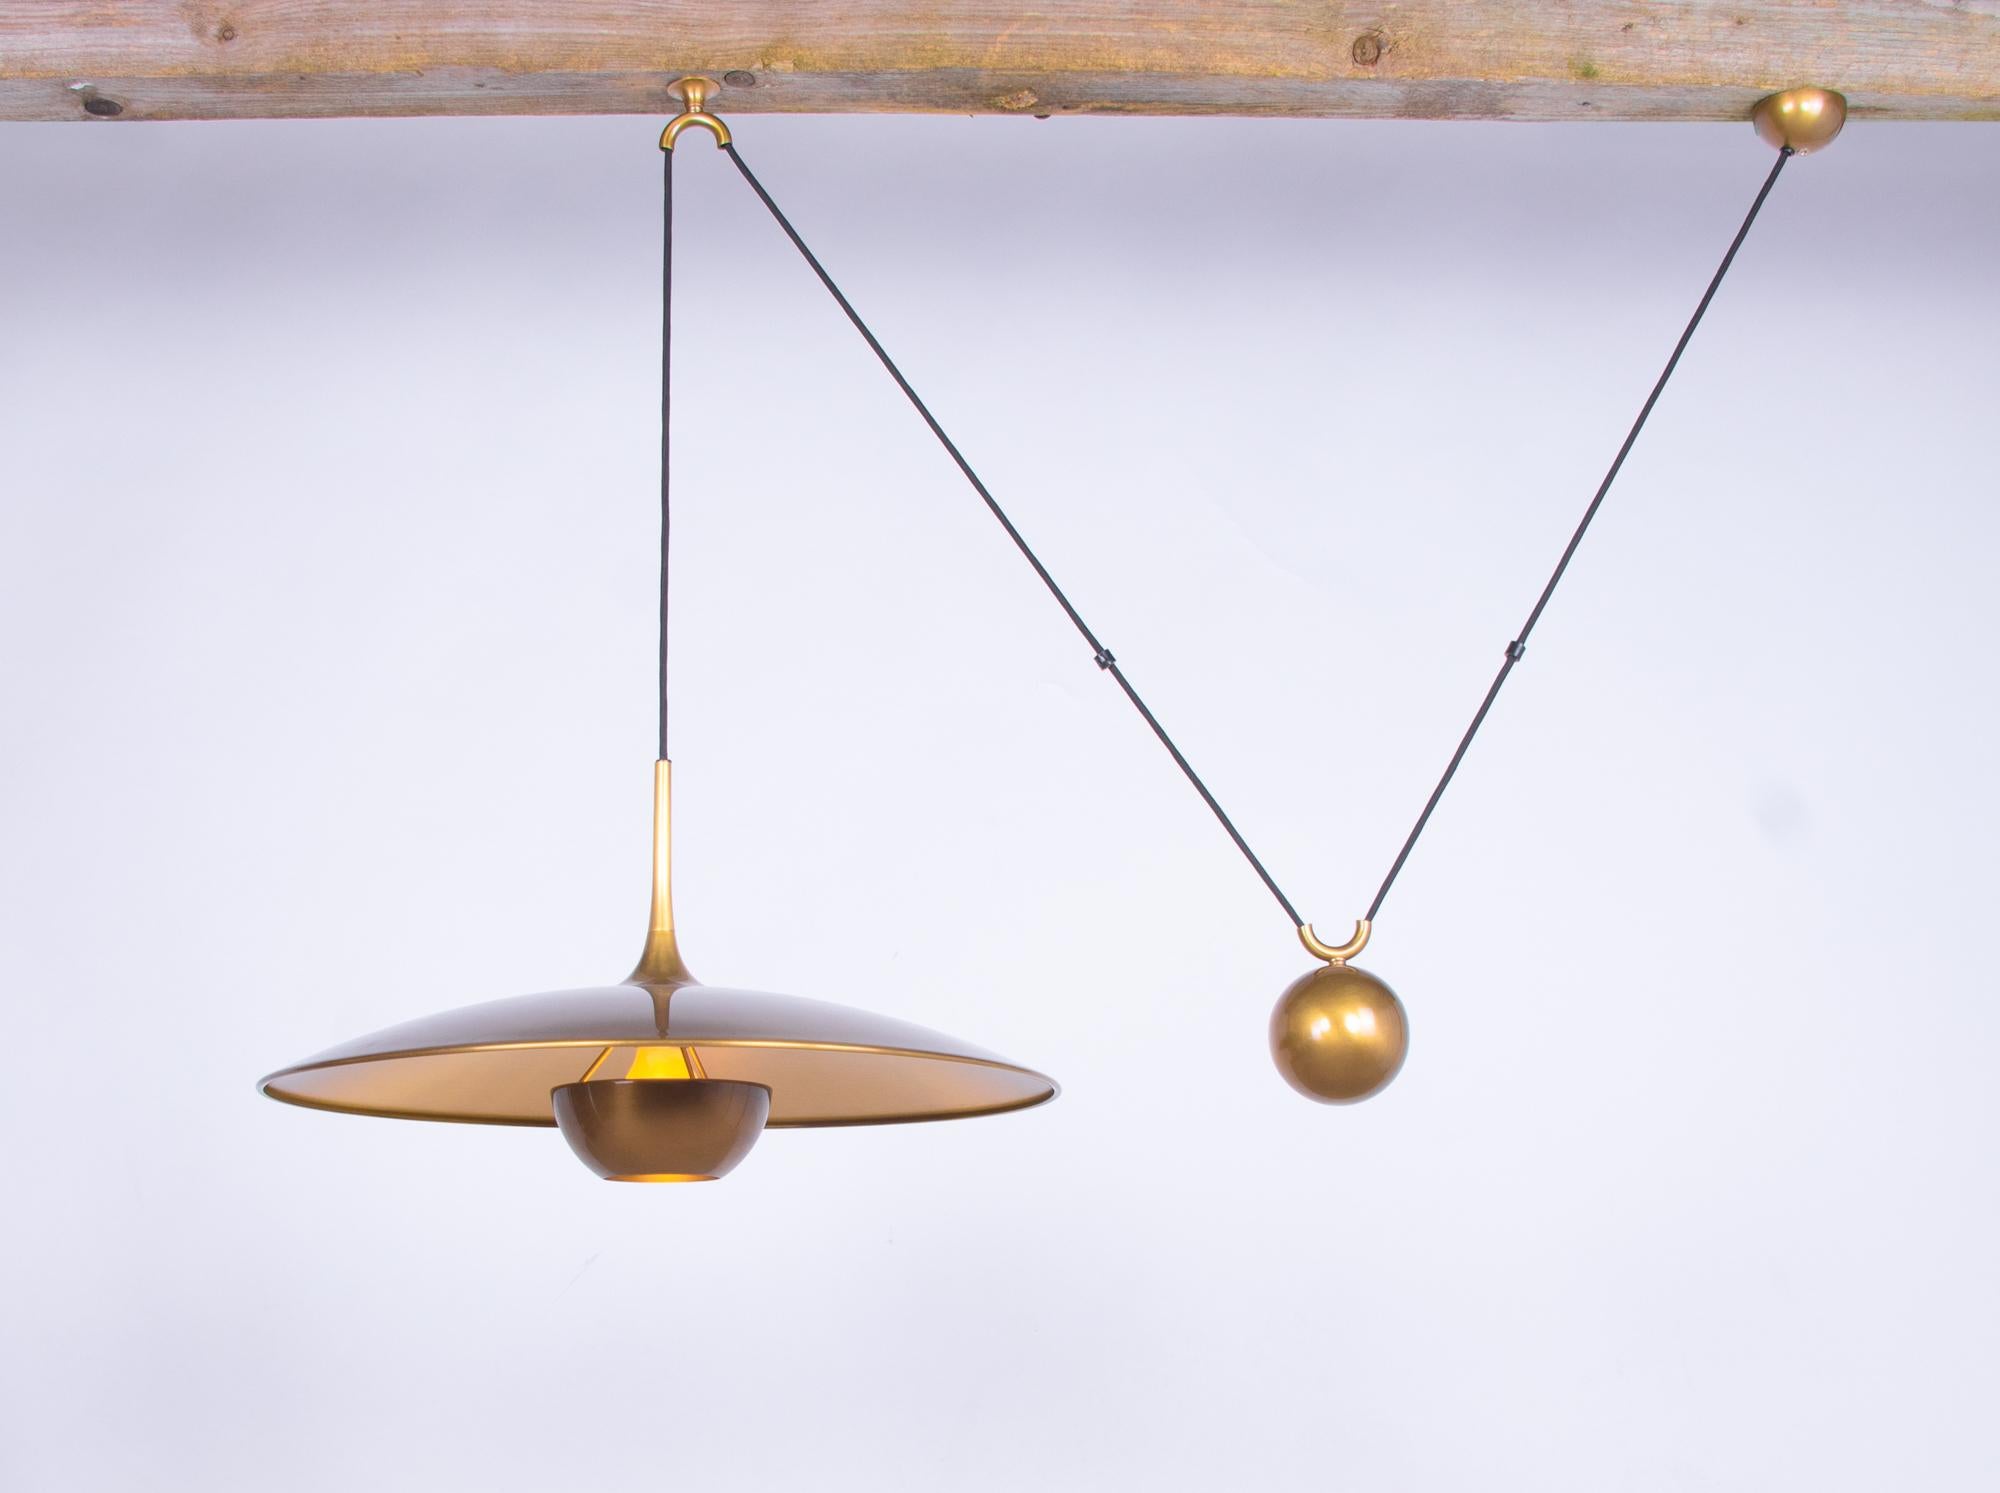 Adjustable suspension ONOS 55 by Florian Schulz / Licht und Objekt made in Germany in the 1970s. Made for the eternity! The brass lamp is well-constructed and of extremely high quality (made in Germany) and, despite series production, a handmade